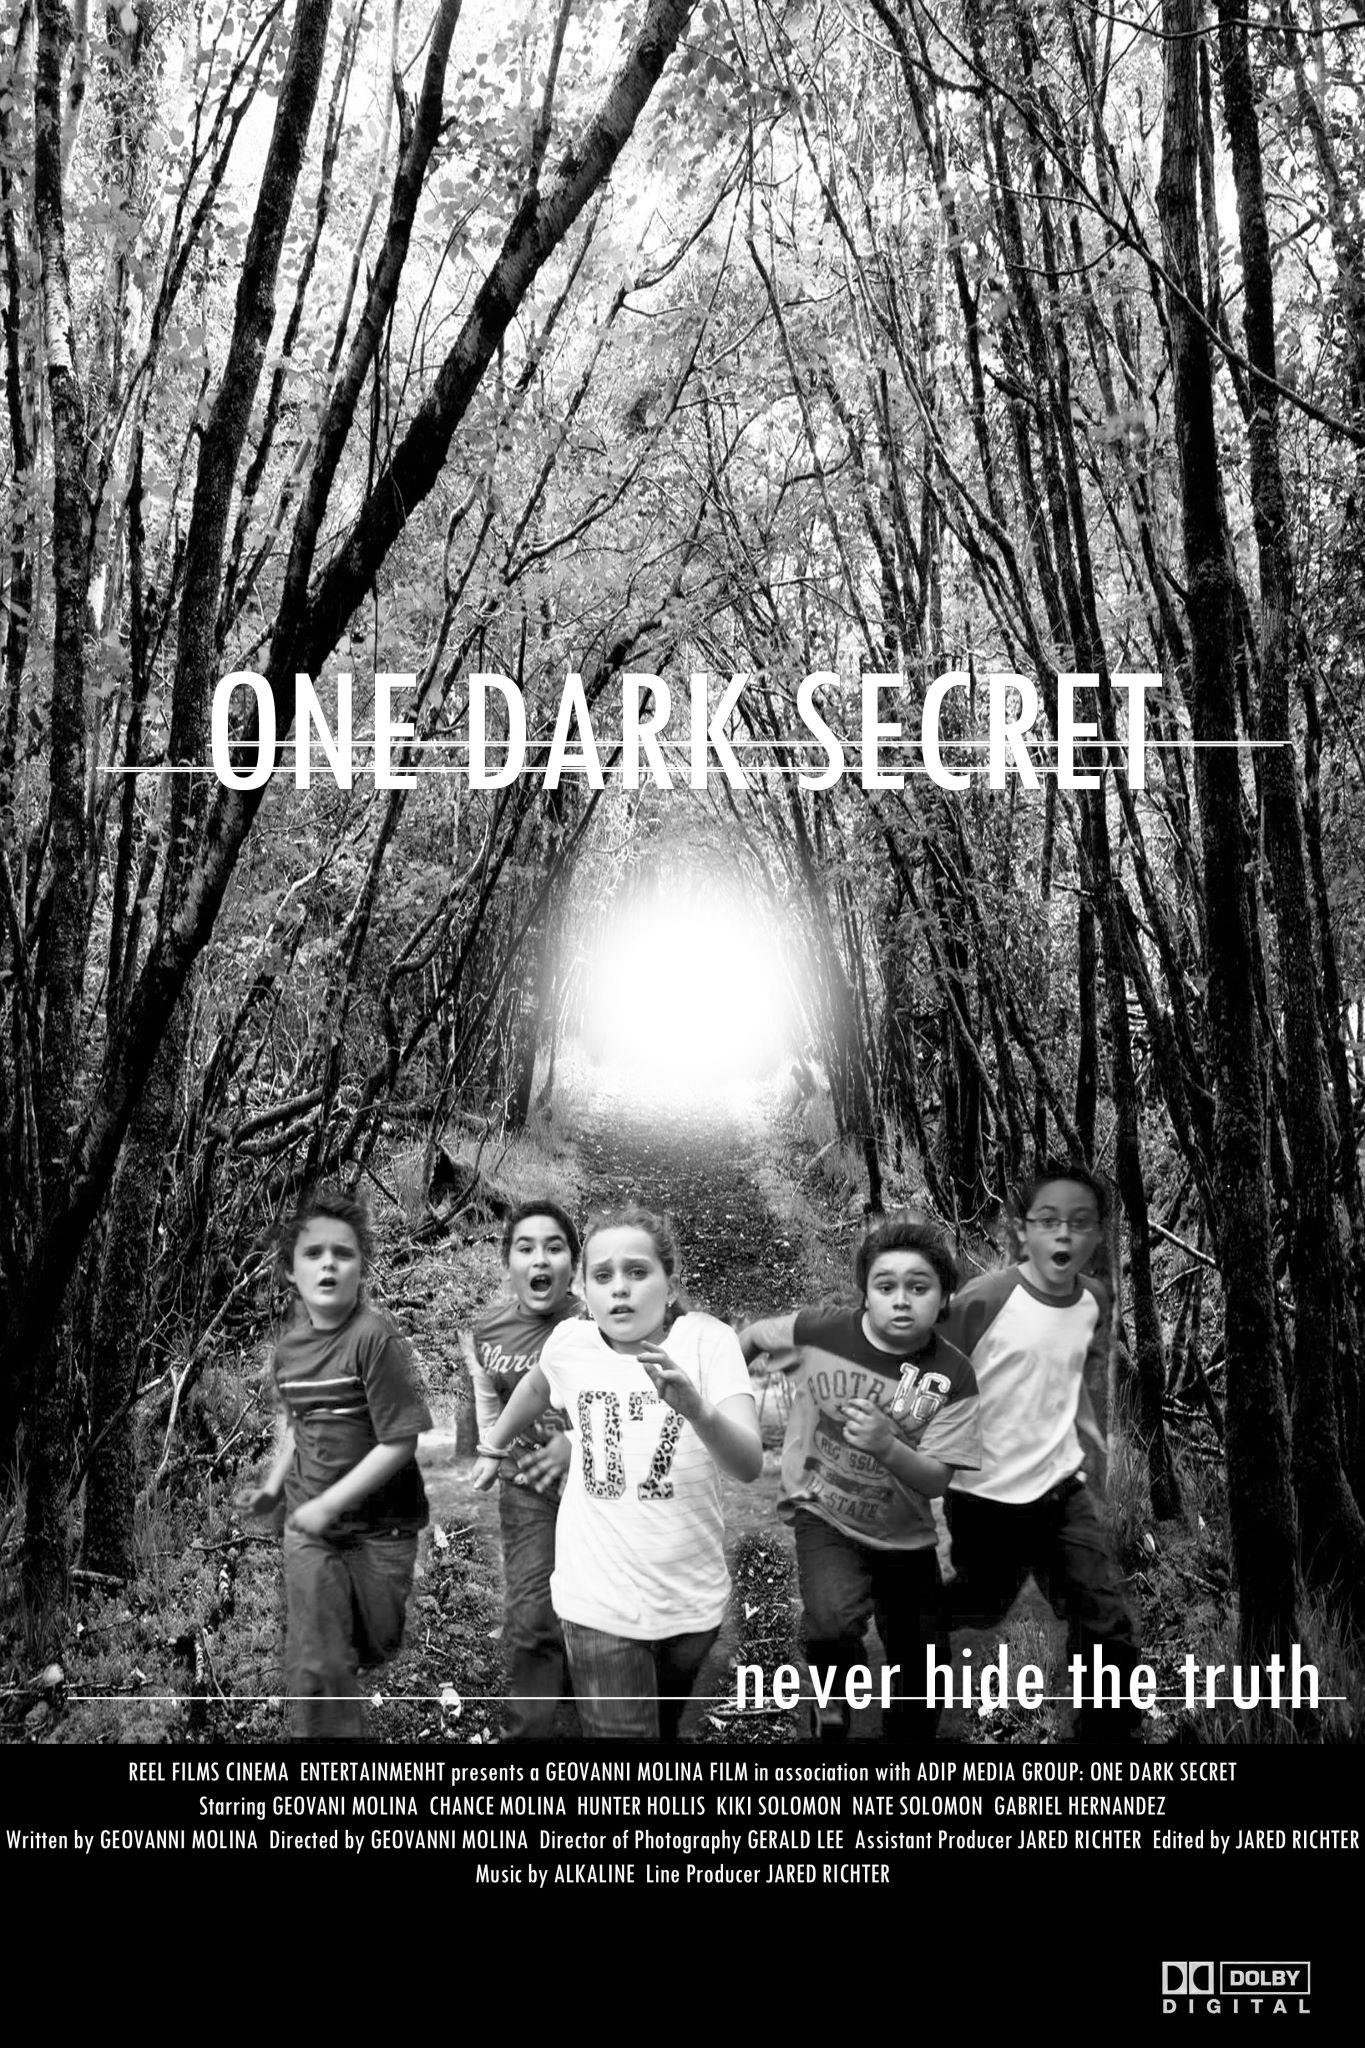 IN 1987 FIVE CHILDREN WENT INTO THE WOODS AND EXPERIENCED THE MOST HORRIFIC TRAGEDY THAT HAS HAUNTED THEM FOR 25 YEARS. DRAWN BACK TO THOSE EVENTS BY A SUPERNATURAL BEING, THESE FIVE FRIENDS NOW REUNITE TO DISCOVER THE TRUTH ABOUT WHAT HAPPENED THAT NIGHT